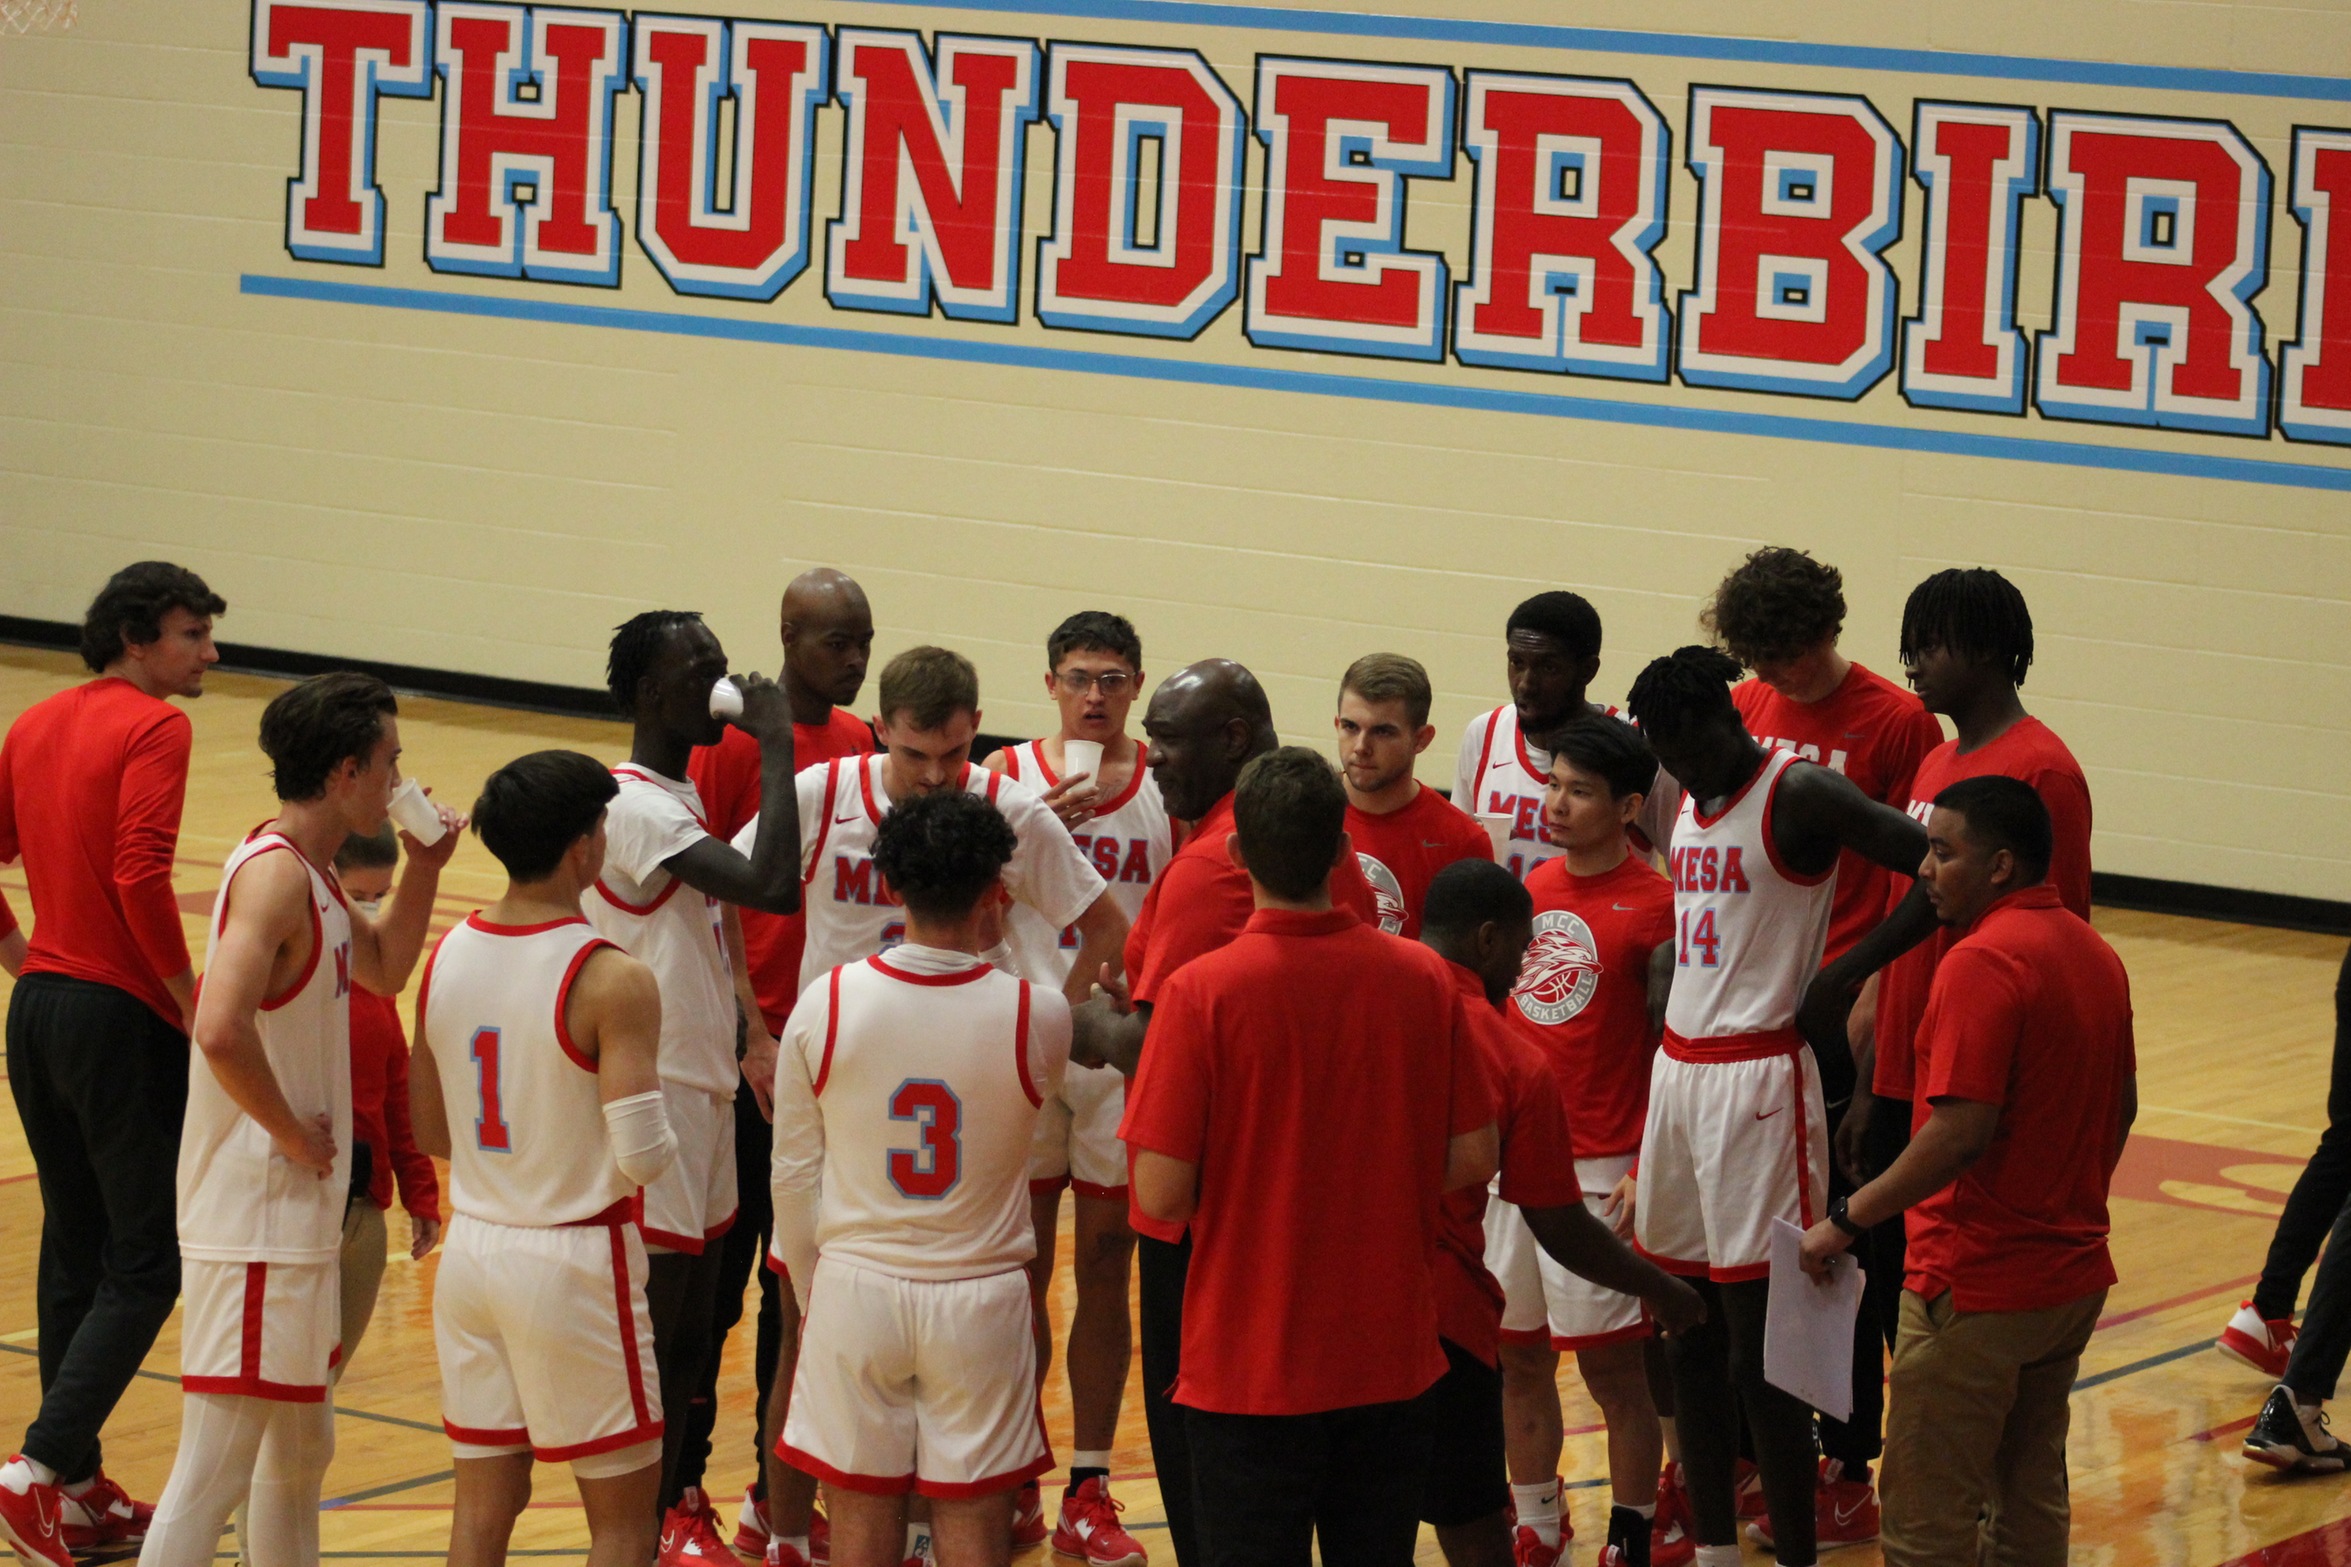 Men's basketball season ends at hands of Cochise in double OT thriller.